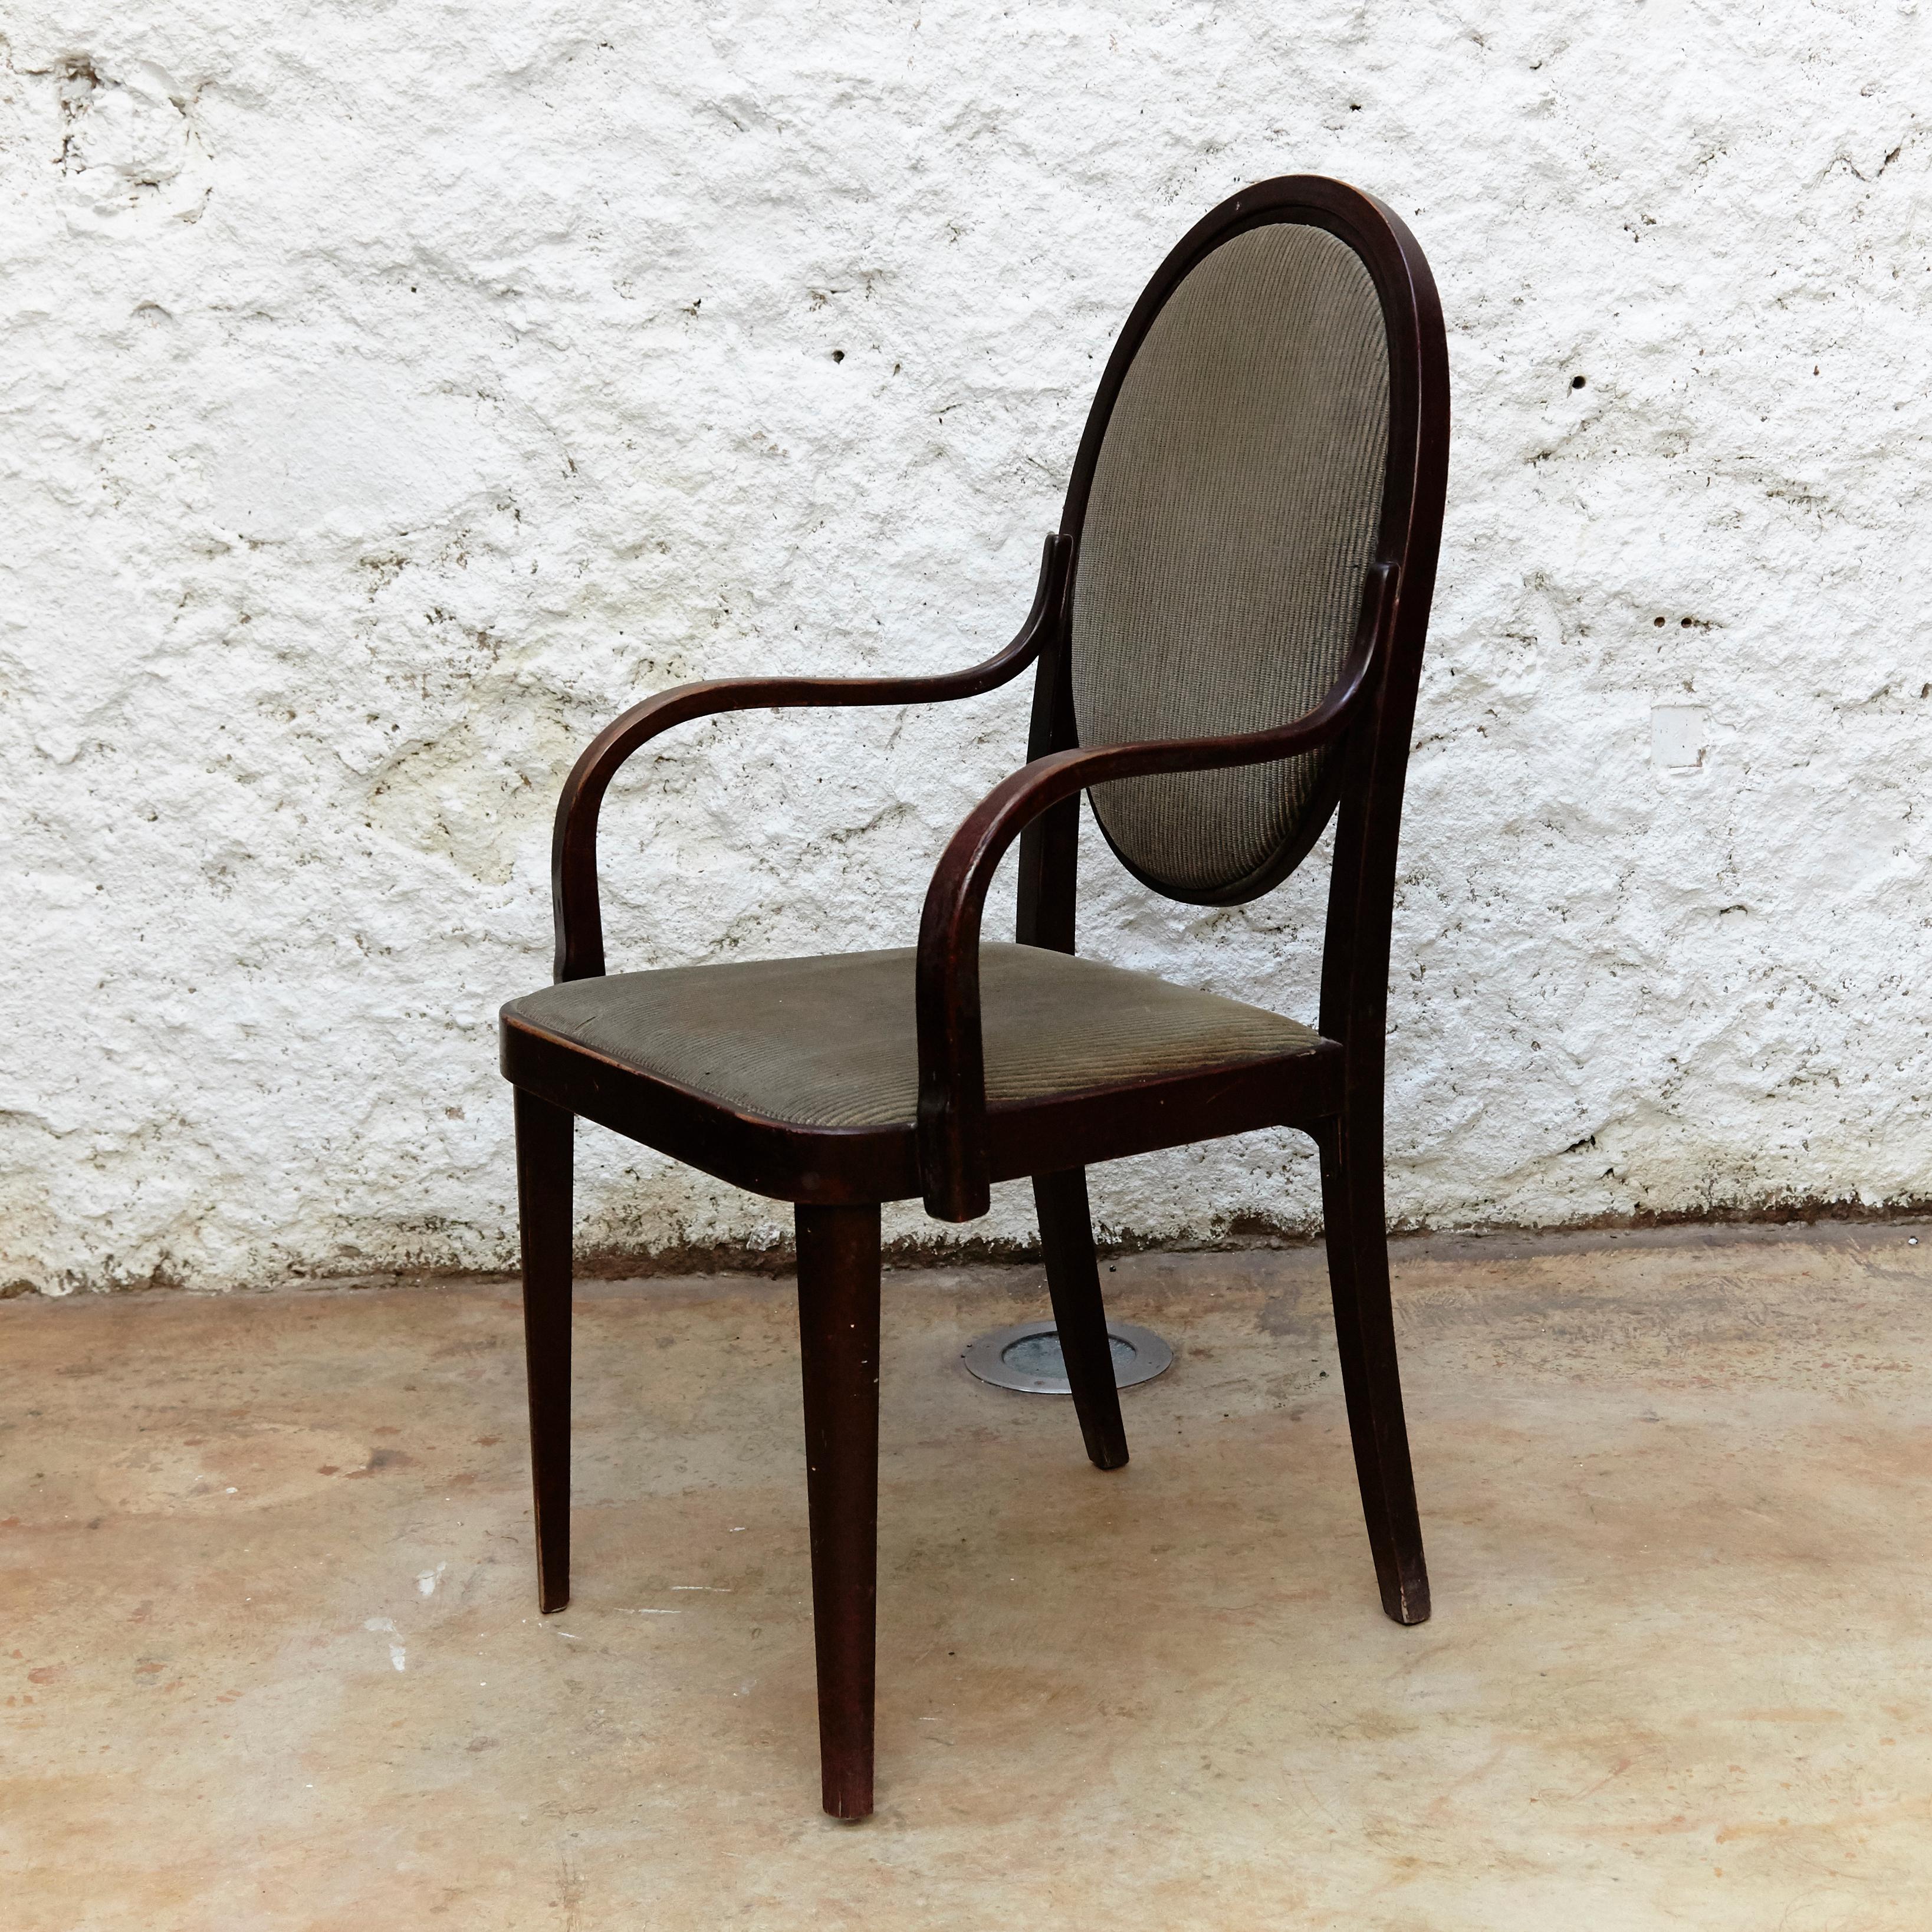 Chair designed by Josef Hoffmann.
Manufactured by Thonet, circa 1970.
Wood and upholstery.

In original condition with wear consistent of age and use, preserving a beautiful patina.

Josef Hoffmann (December 15, 1870-May 7, 1956) was an